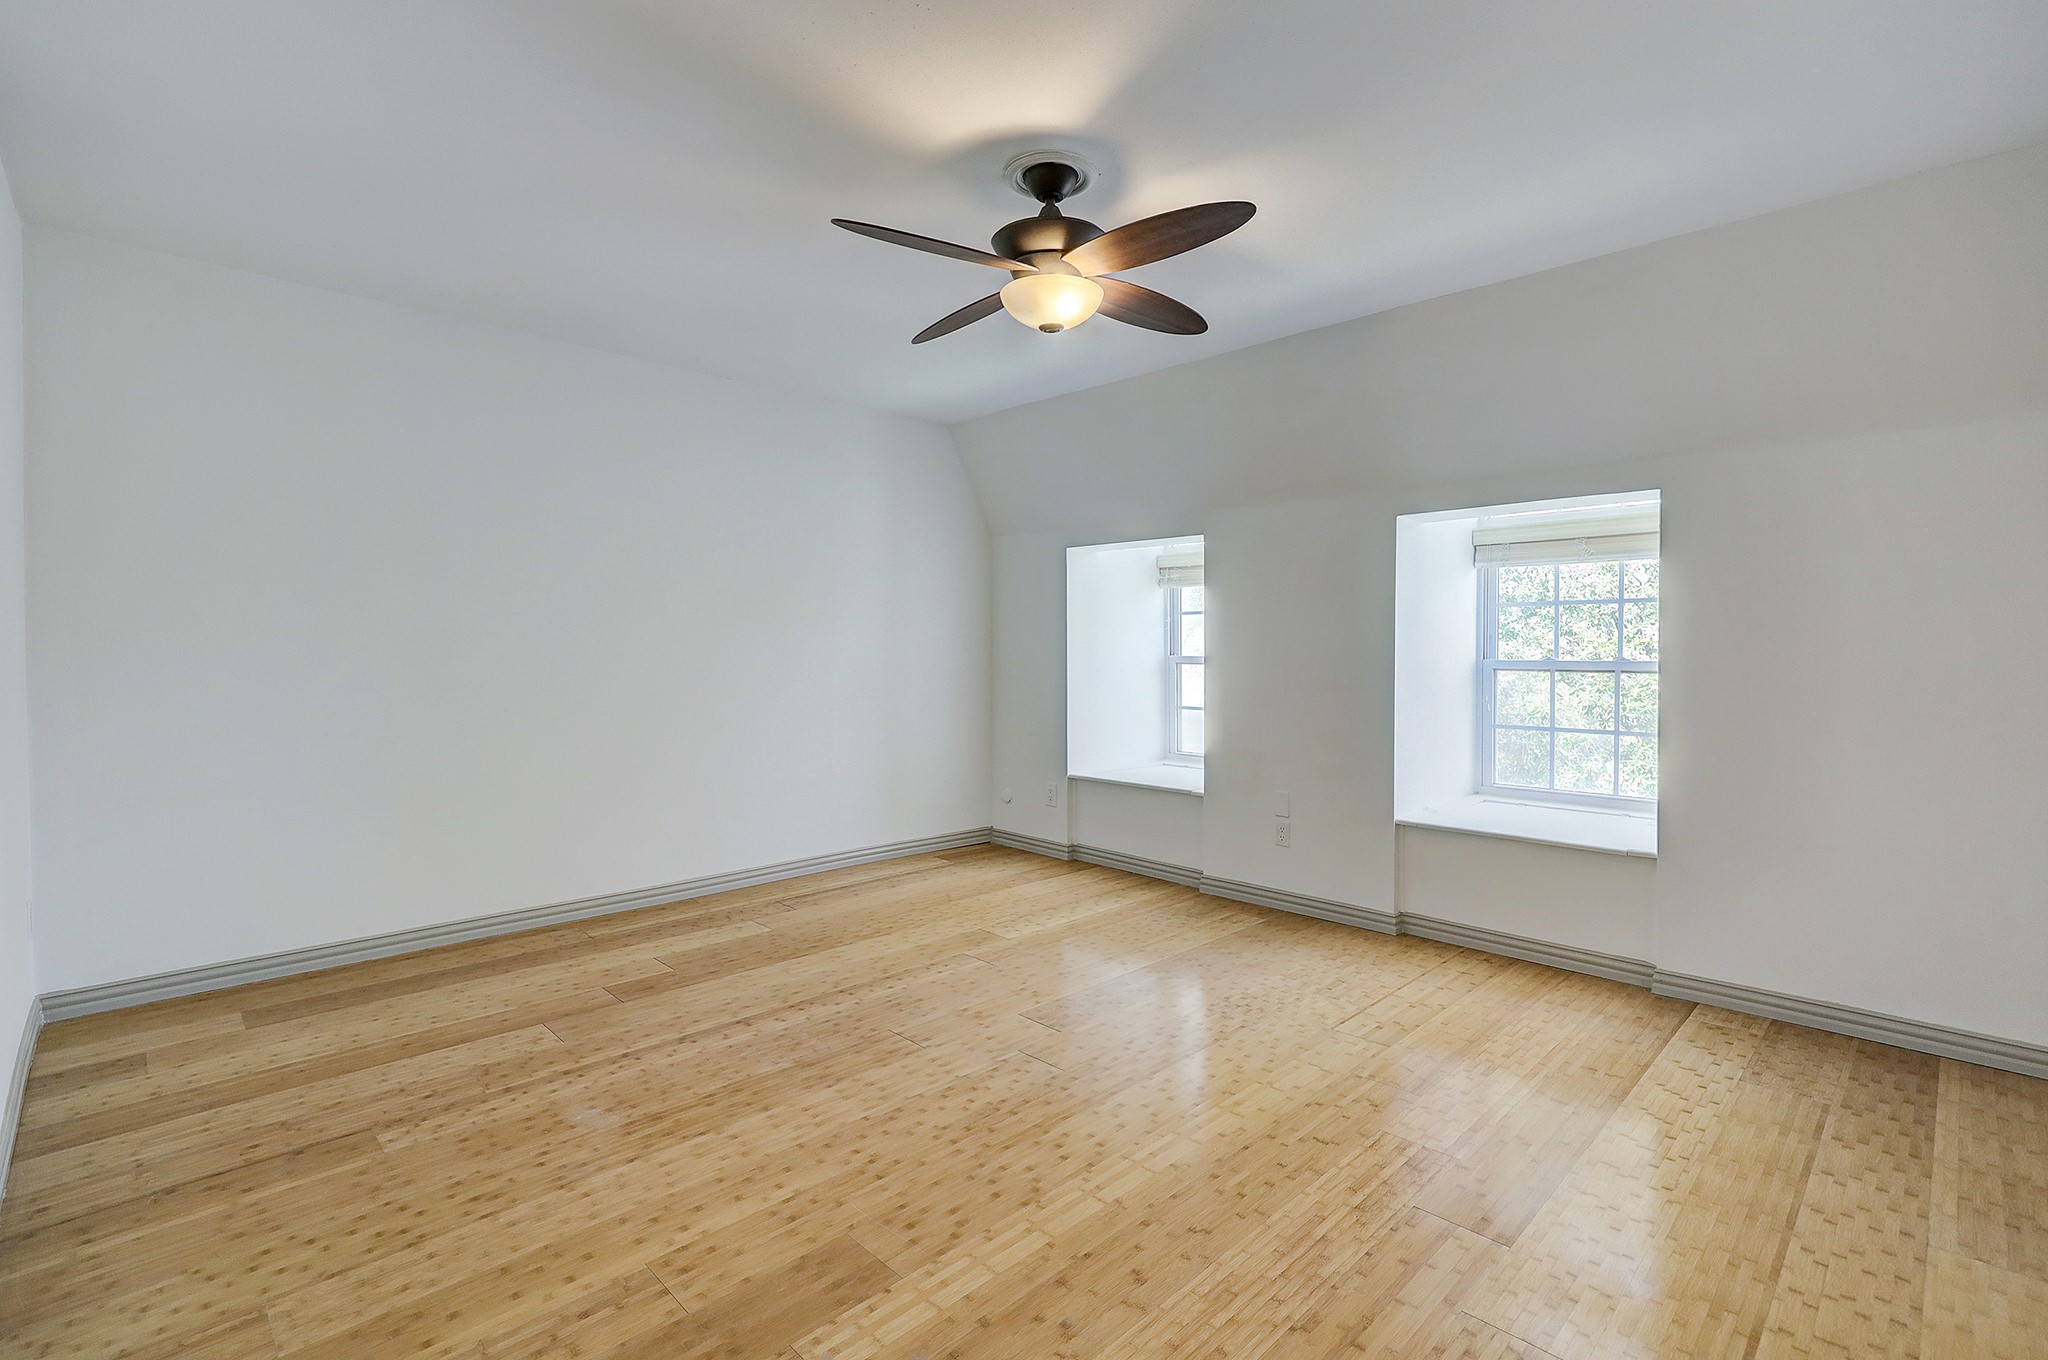 A sizable bedroom offers durable wood-like flooring, and a ceiling fan with light kit. Large windows flood the room with natural light, while the window sitting doubles as storage space.